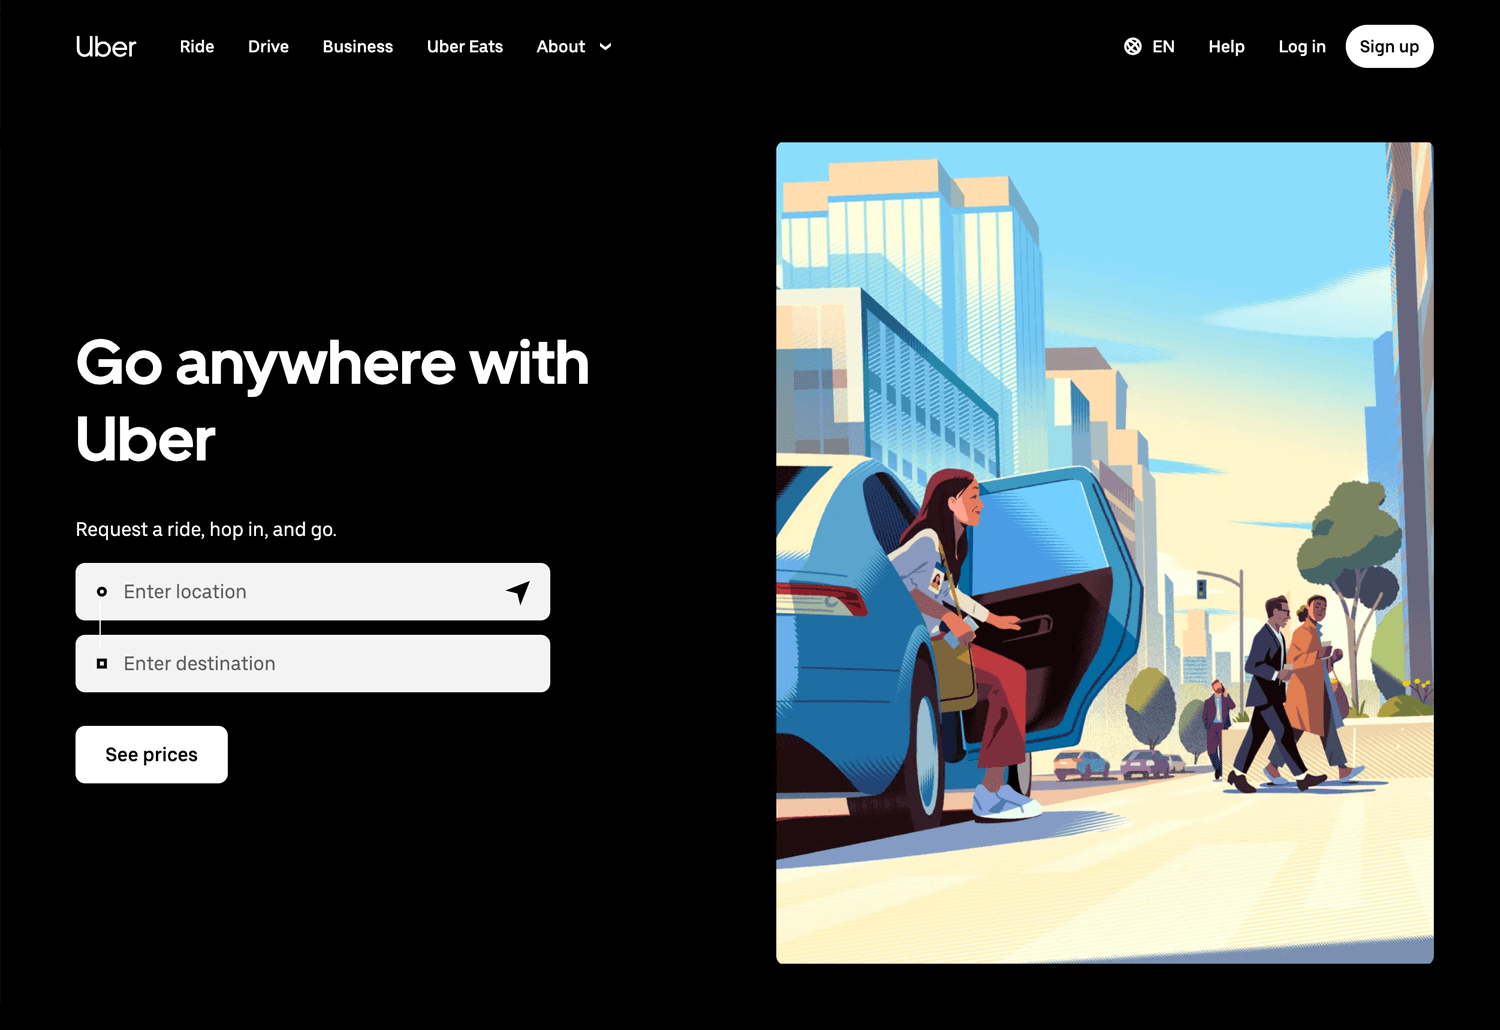 Uber homepage with a navigation bar, search fields for location and destination, and an illustration of a woman exiting a car